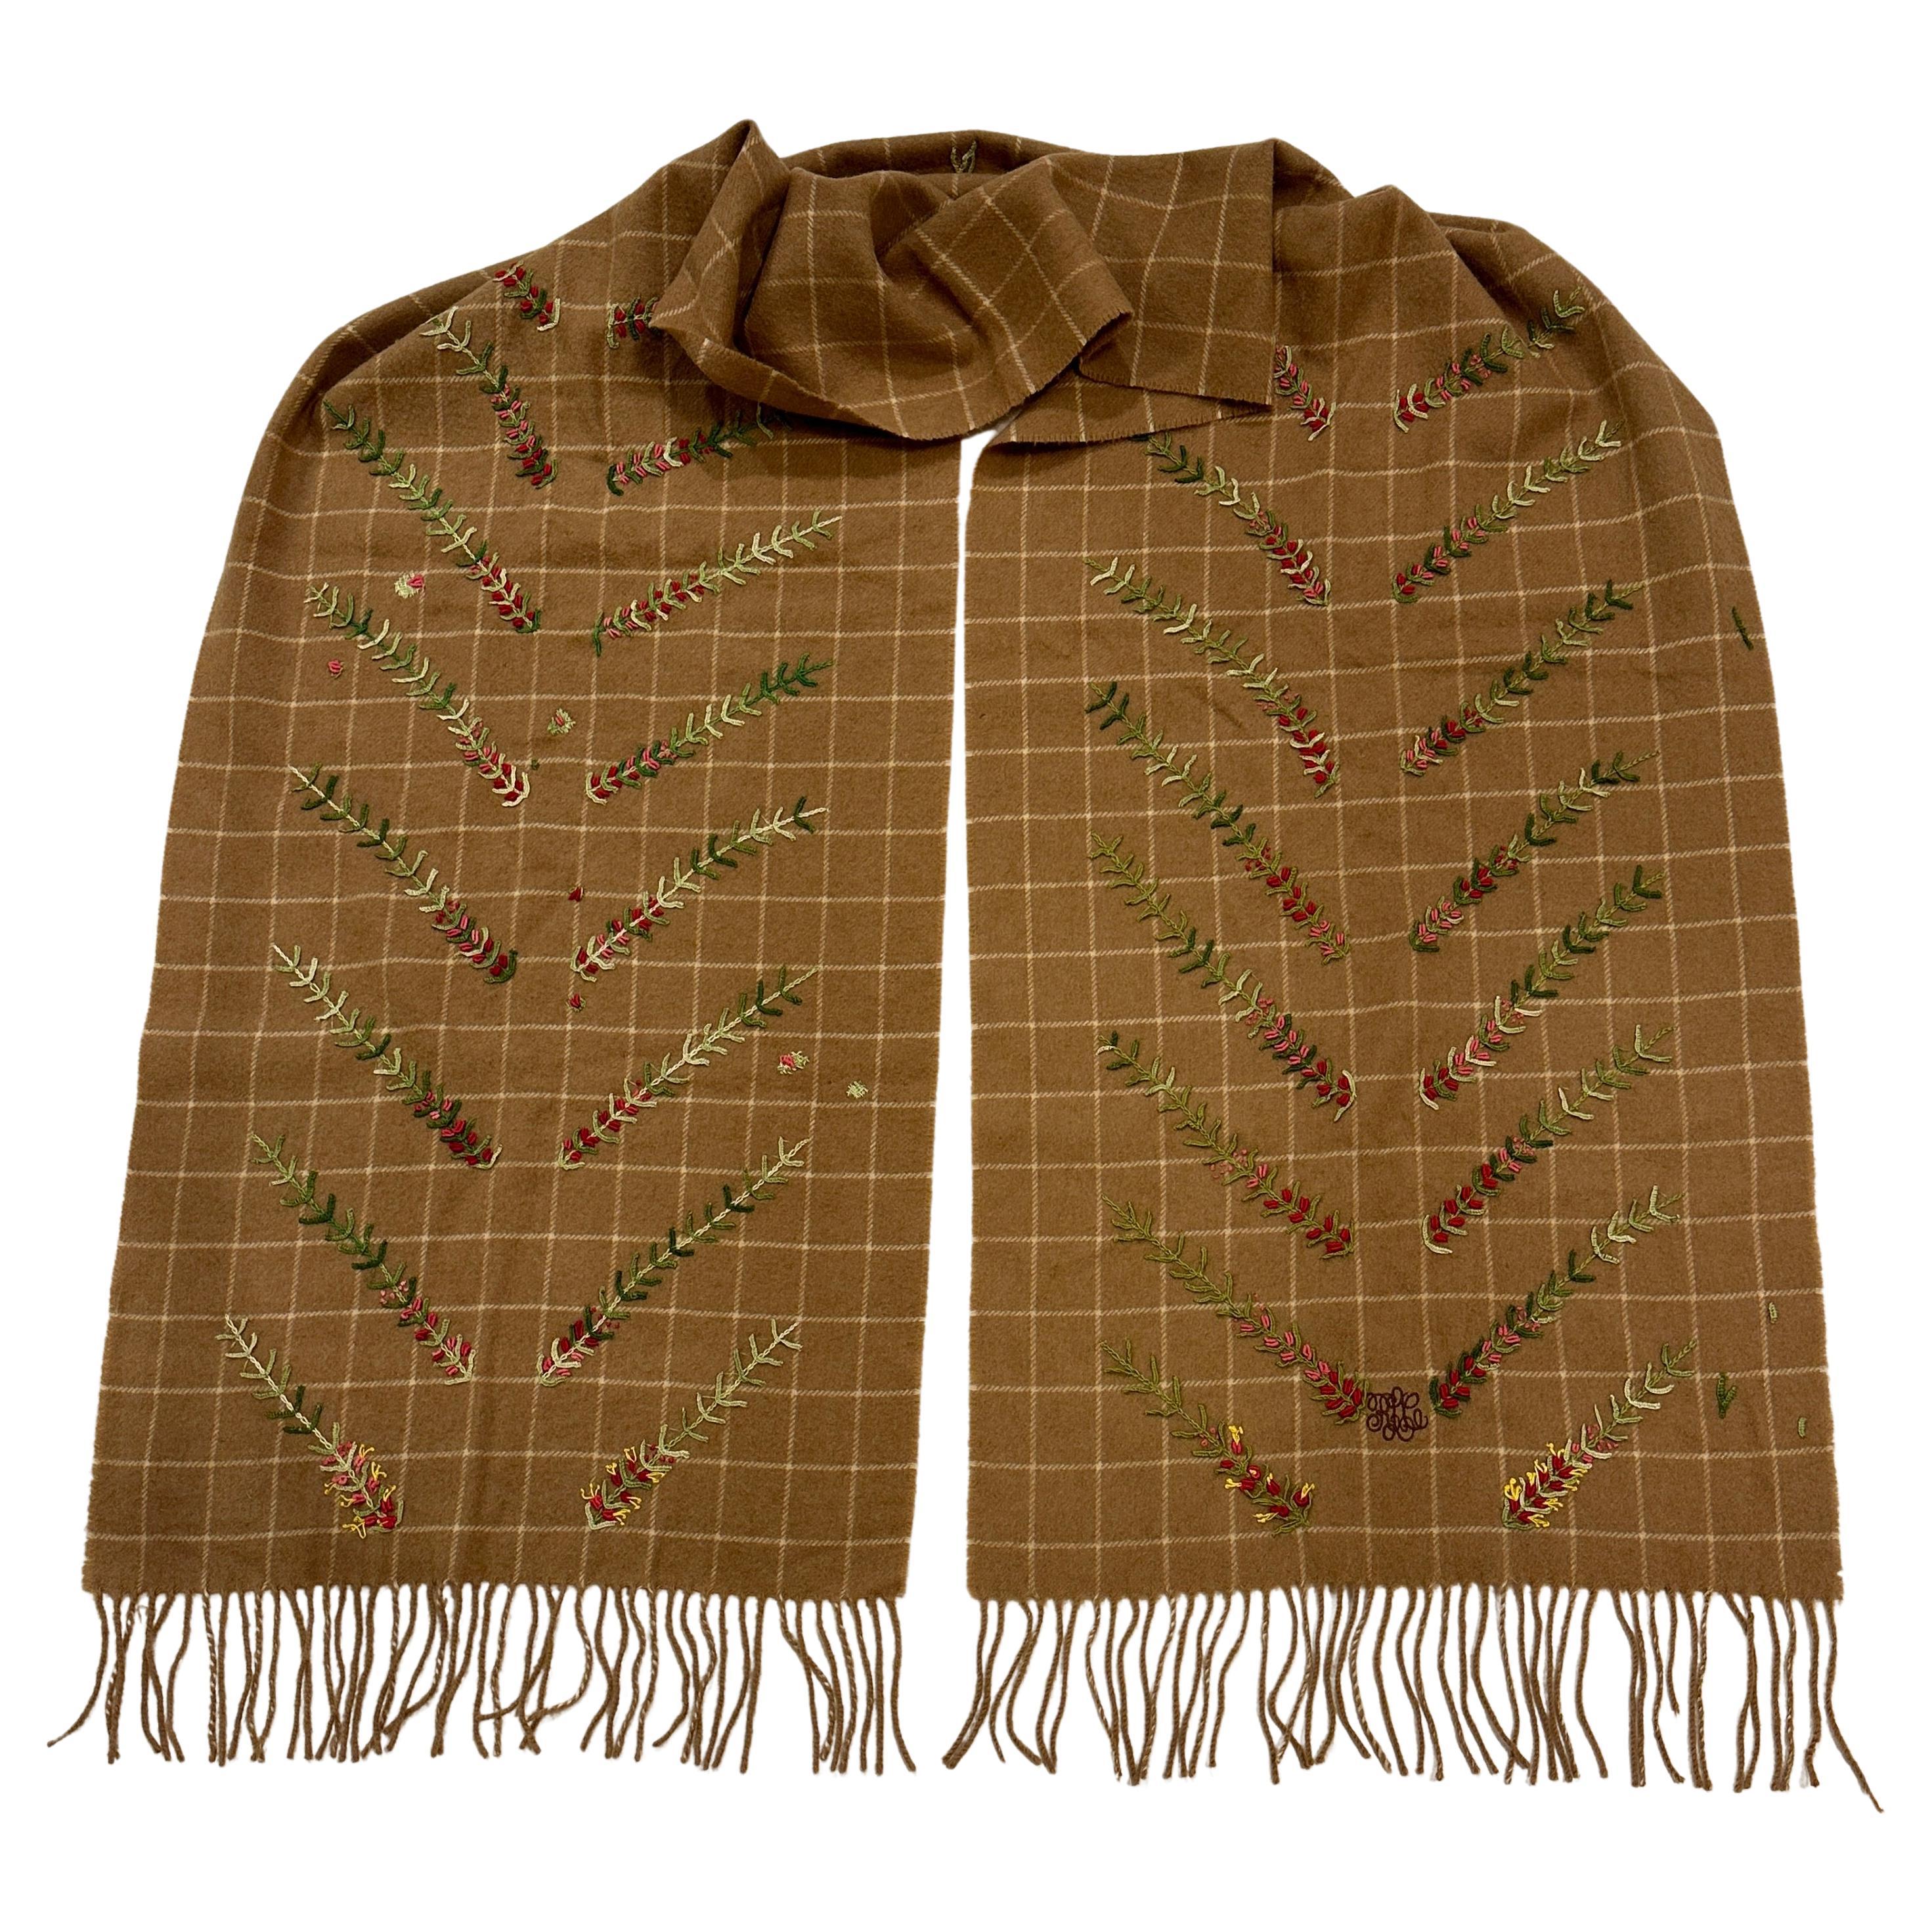 Ralph Lauren Huge Hand-Embroidered Camel-Hair Fringed Shawl For Sale